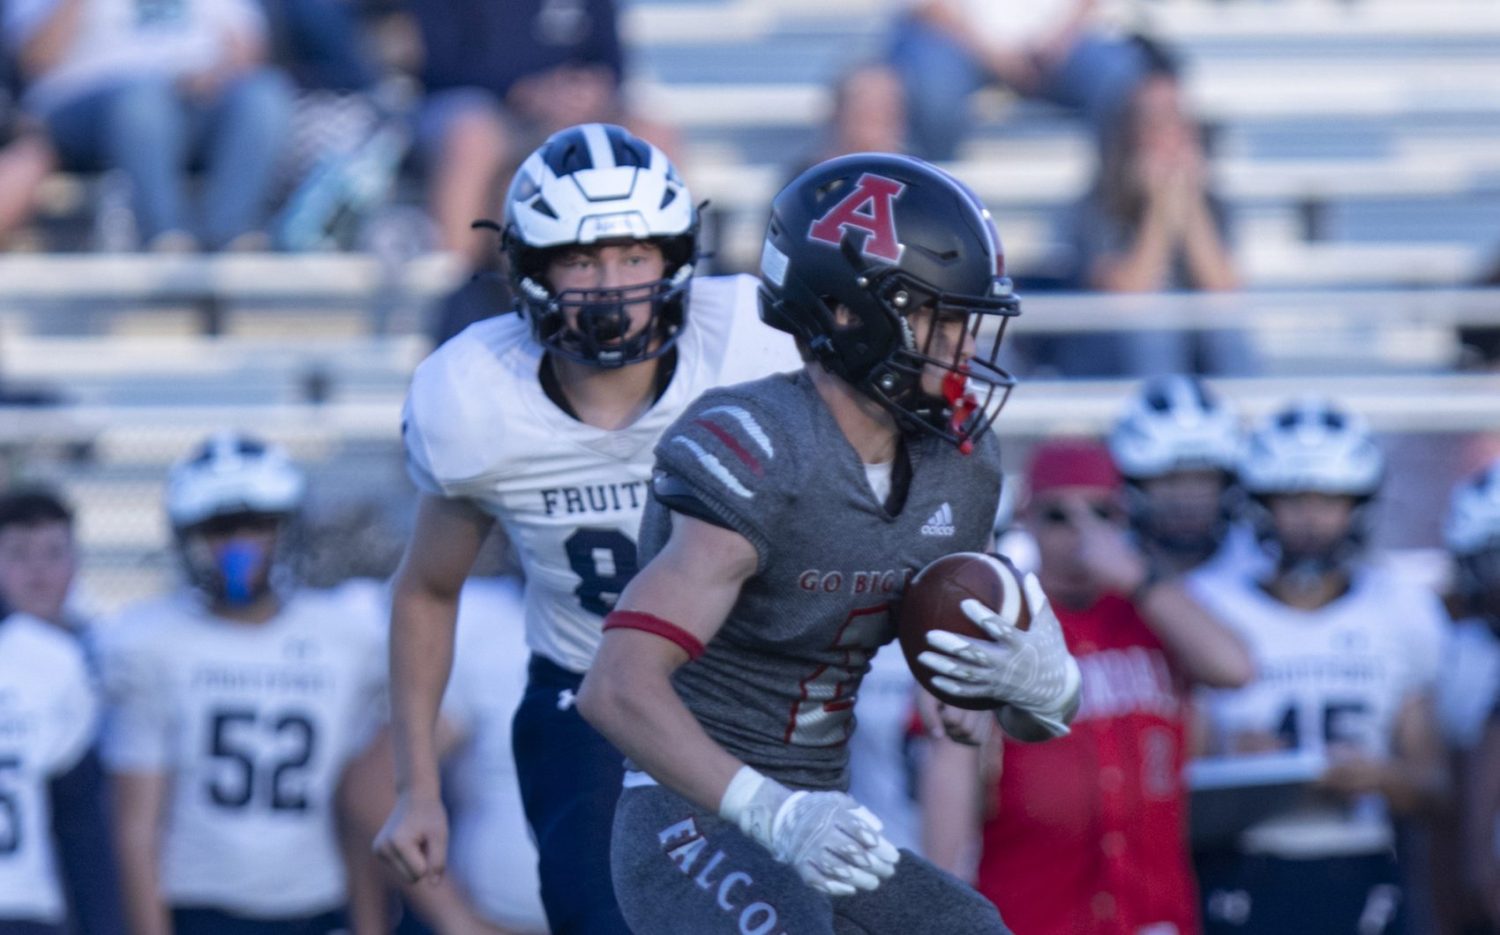 Fruitport remains winless after lopsided loss to Allendale